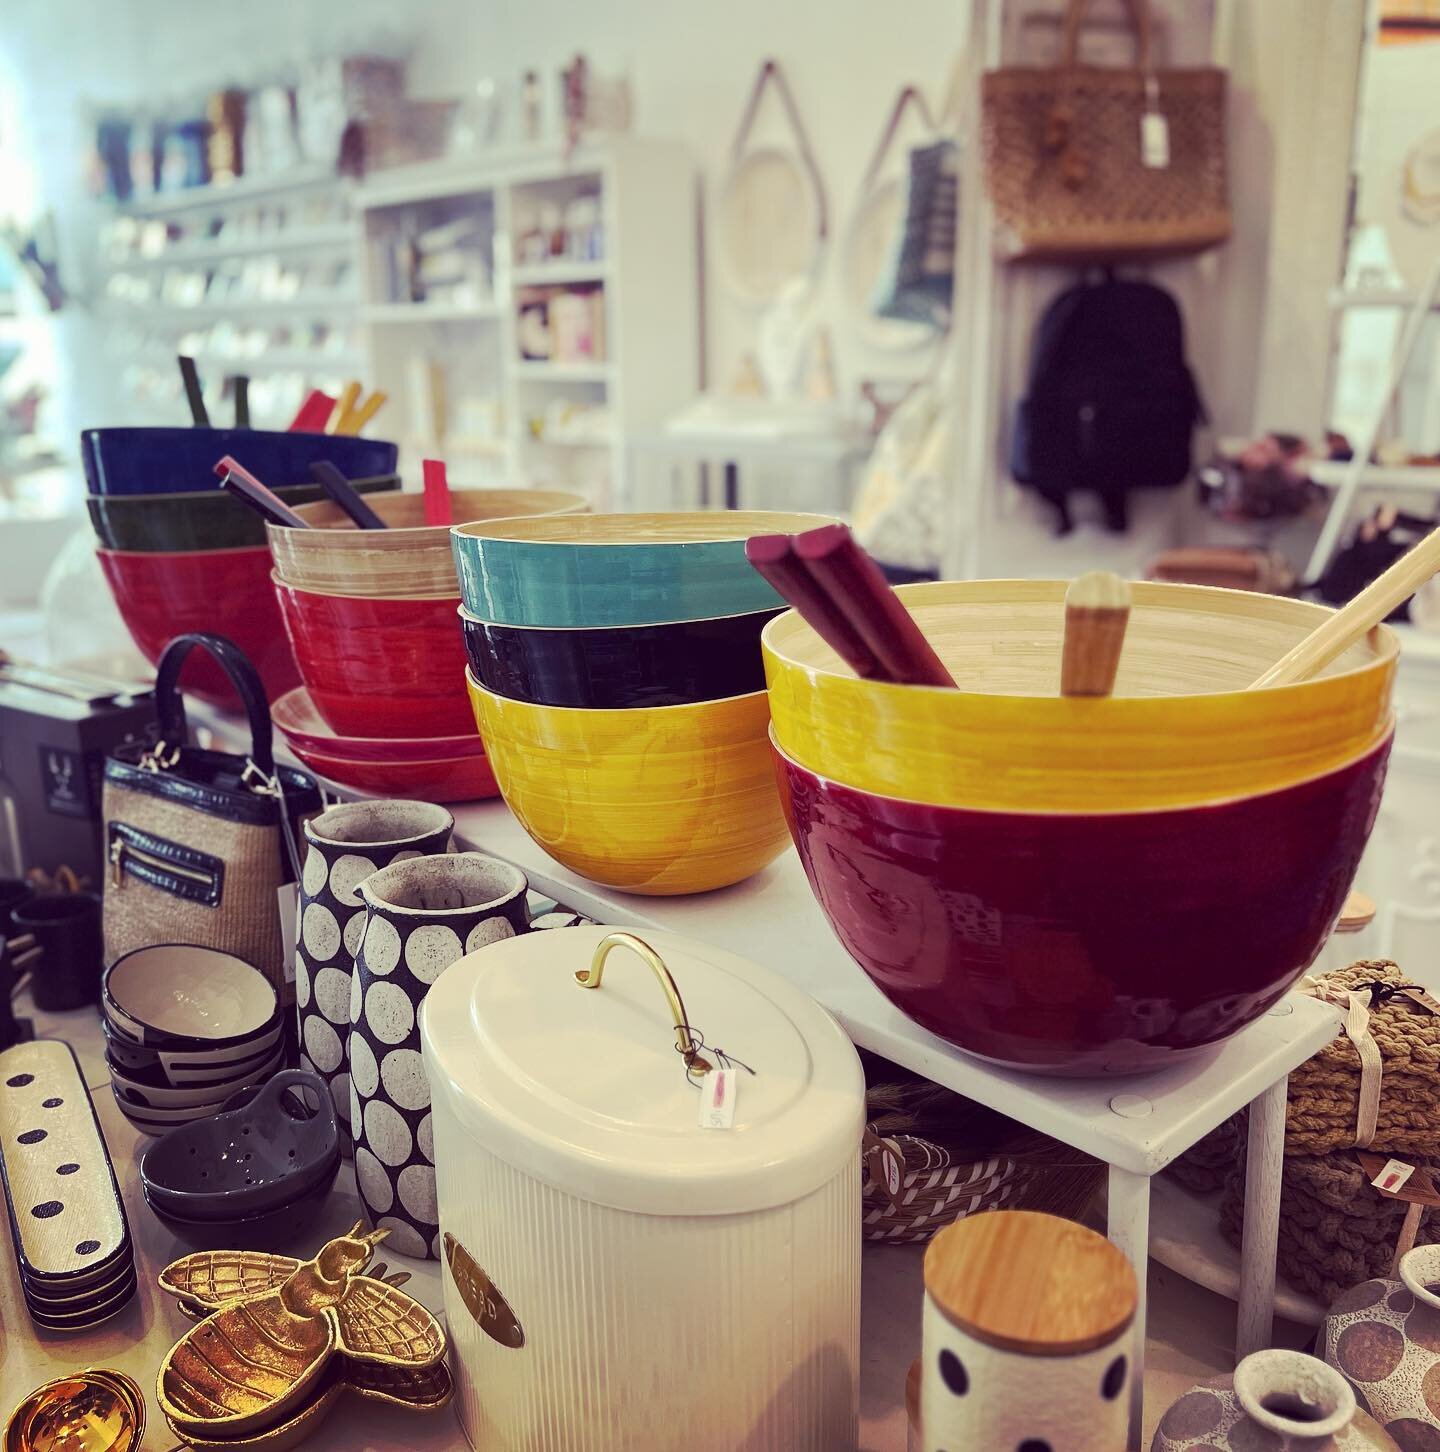 Bowls on Bowls on Bowls❤️These gorgeous and colorful bowls make the best gifts to give and to get😍🎉🌟 @albertlpunkt 
#giftwell #mothersdaygift #giftideas